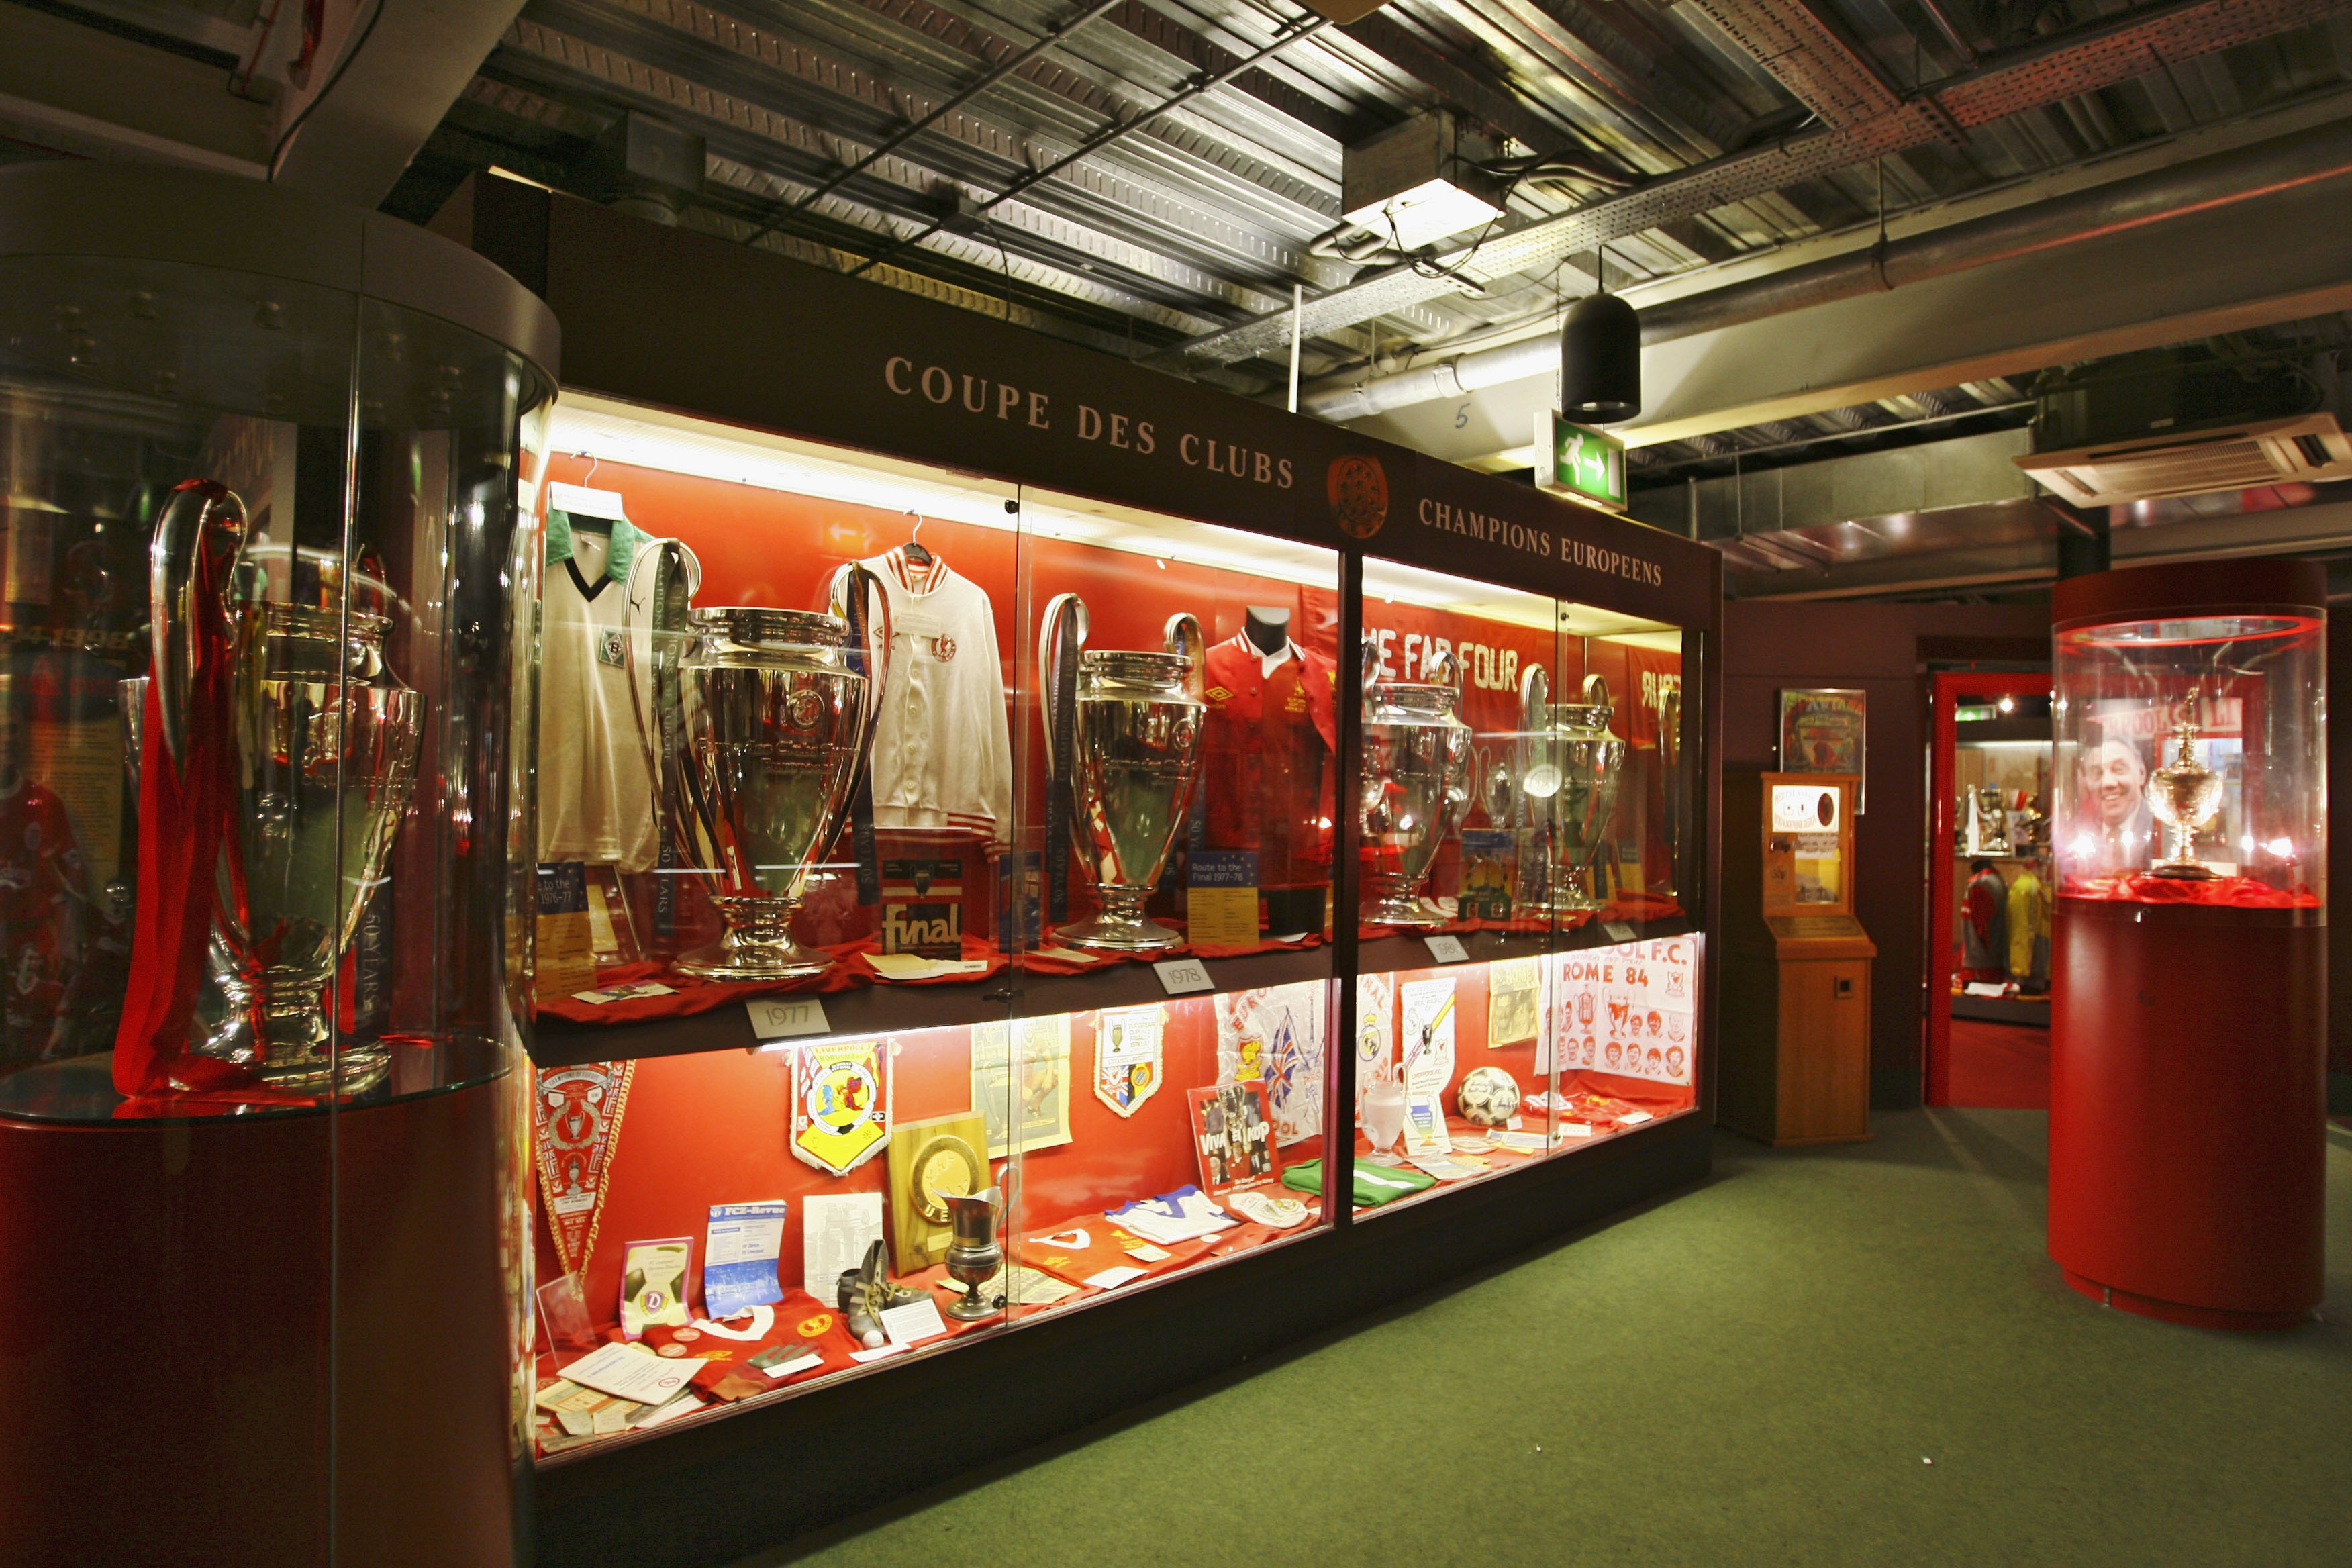 LIVERPOOL, ENGLAND - FEBRUARY 14:  The trophy cabinet at Anfield home of Liverpool Football Club on February 14, 2007 in Liverpool, England. (Photo by Clive Brunskill/Getty Images)